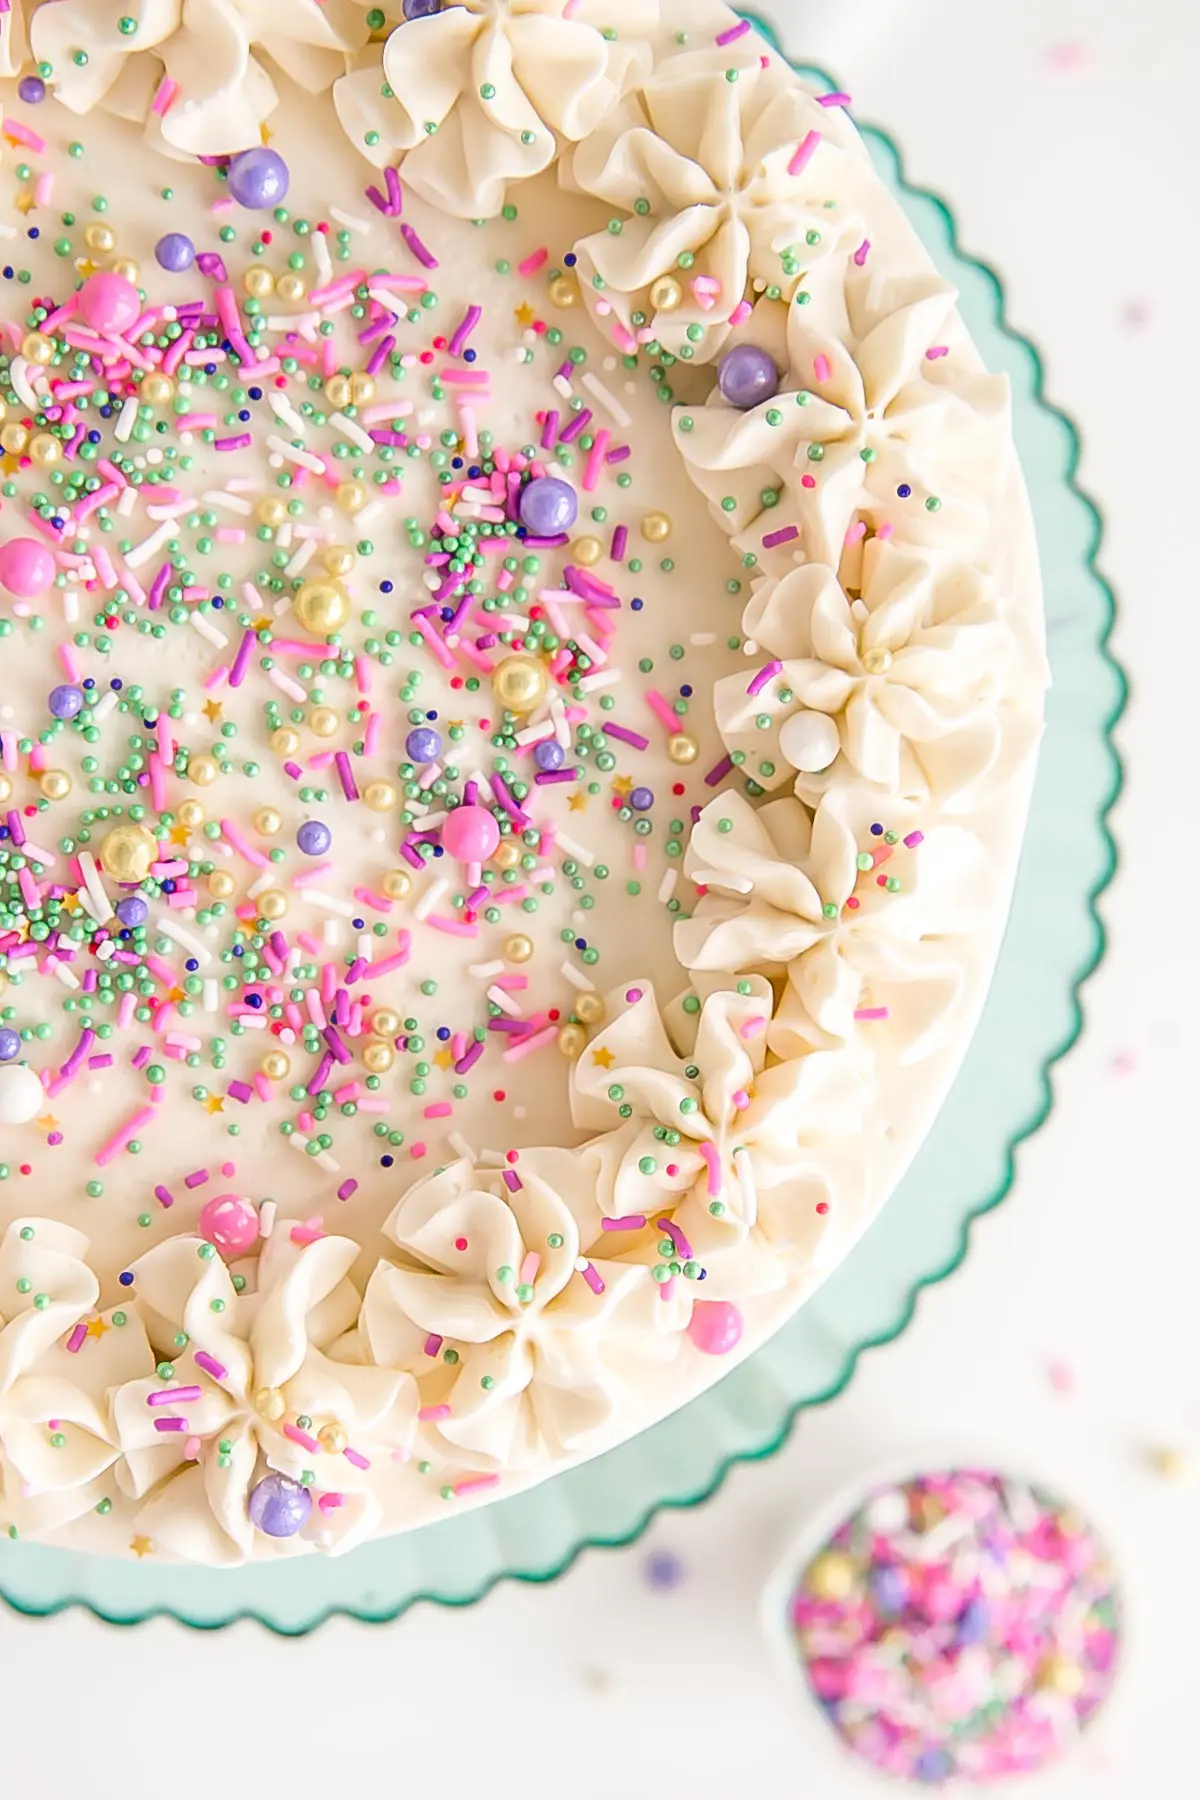 Top down image of a white cake with white buttercream, rosette dollops, and sprinkles.